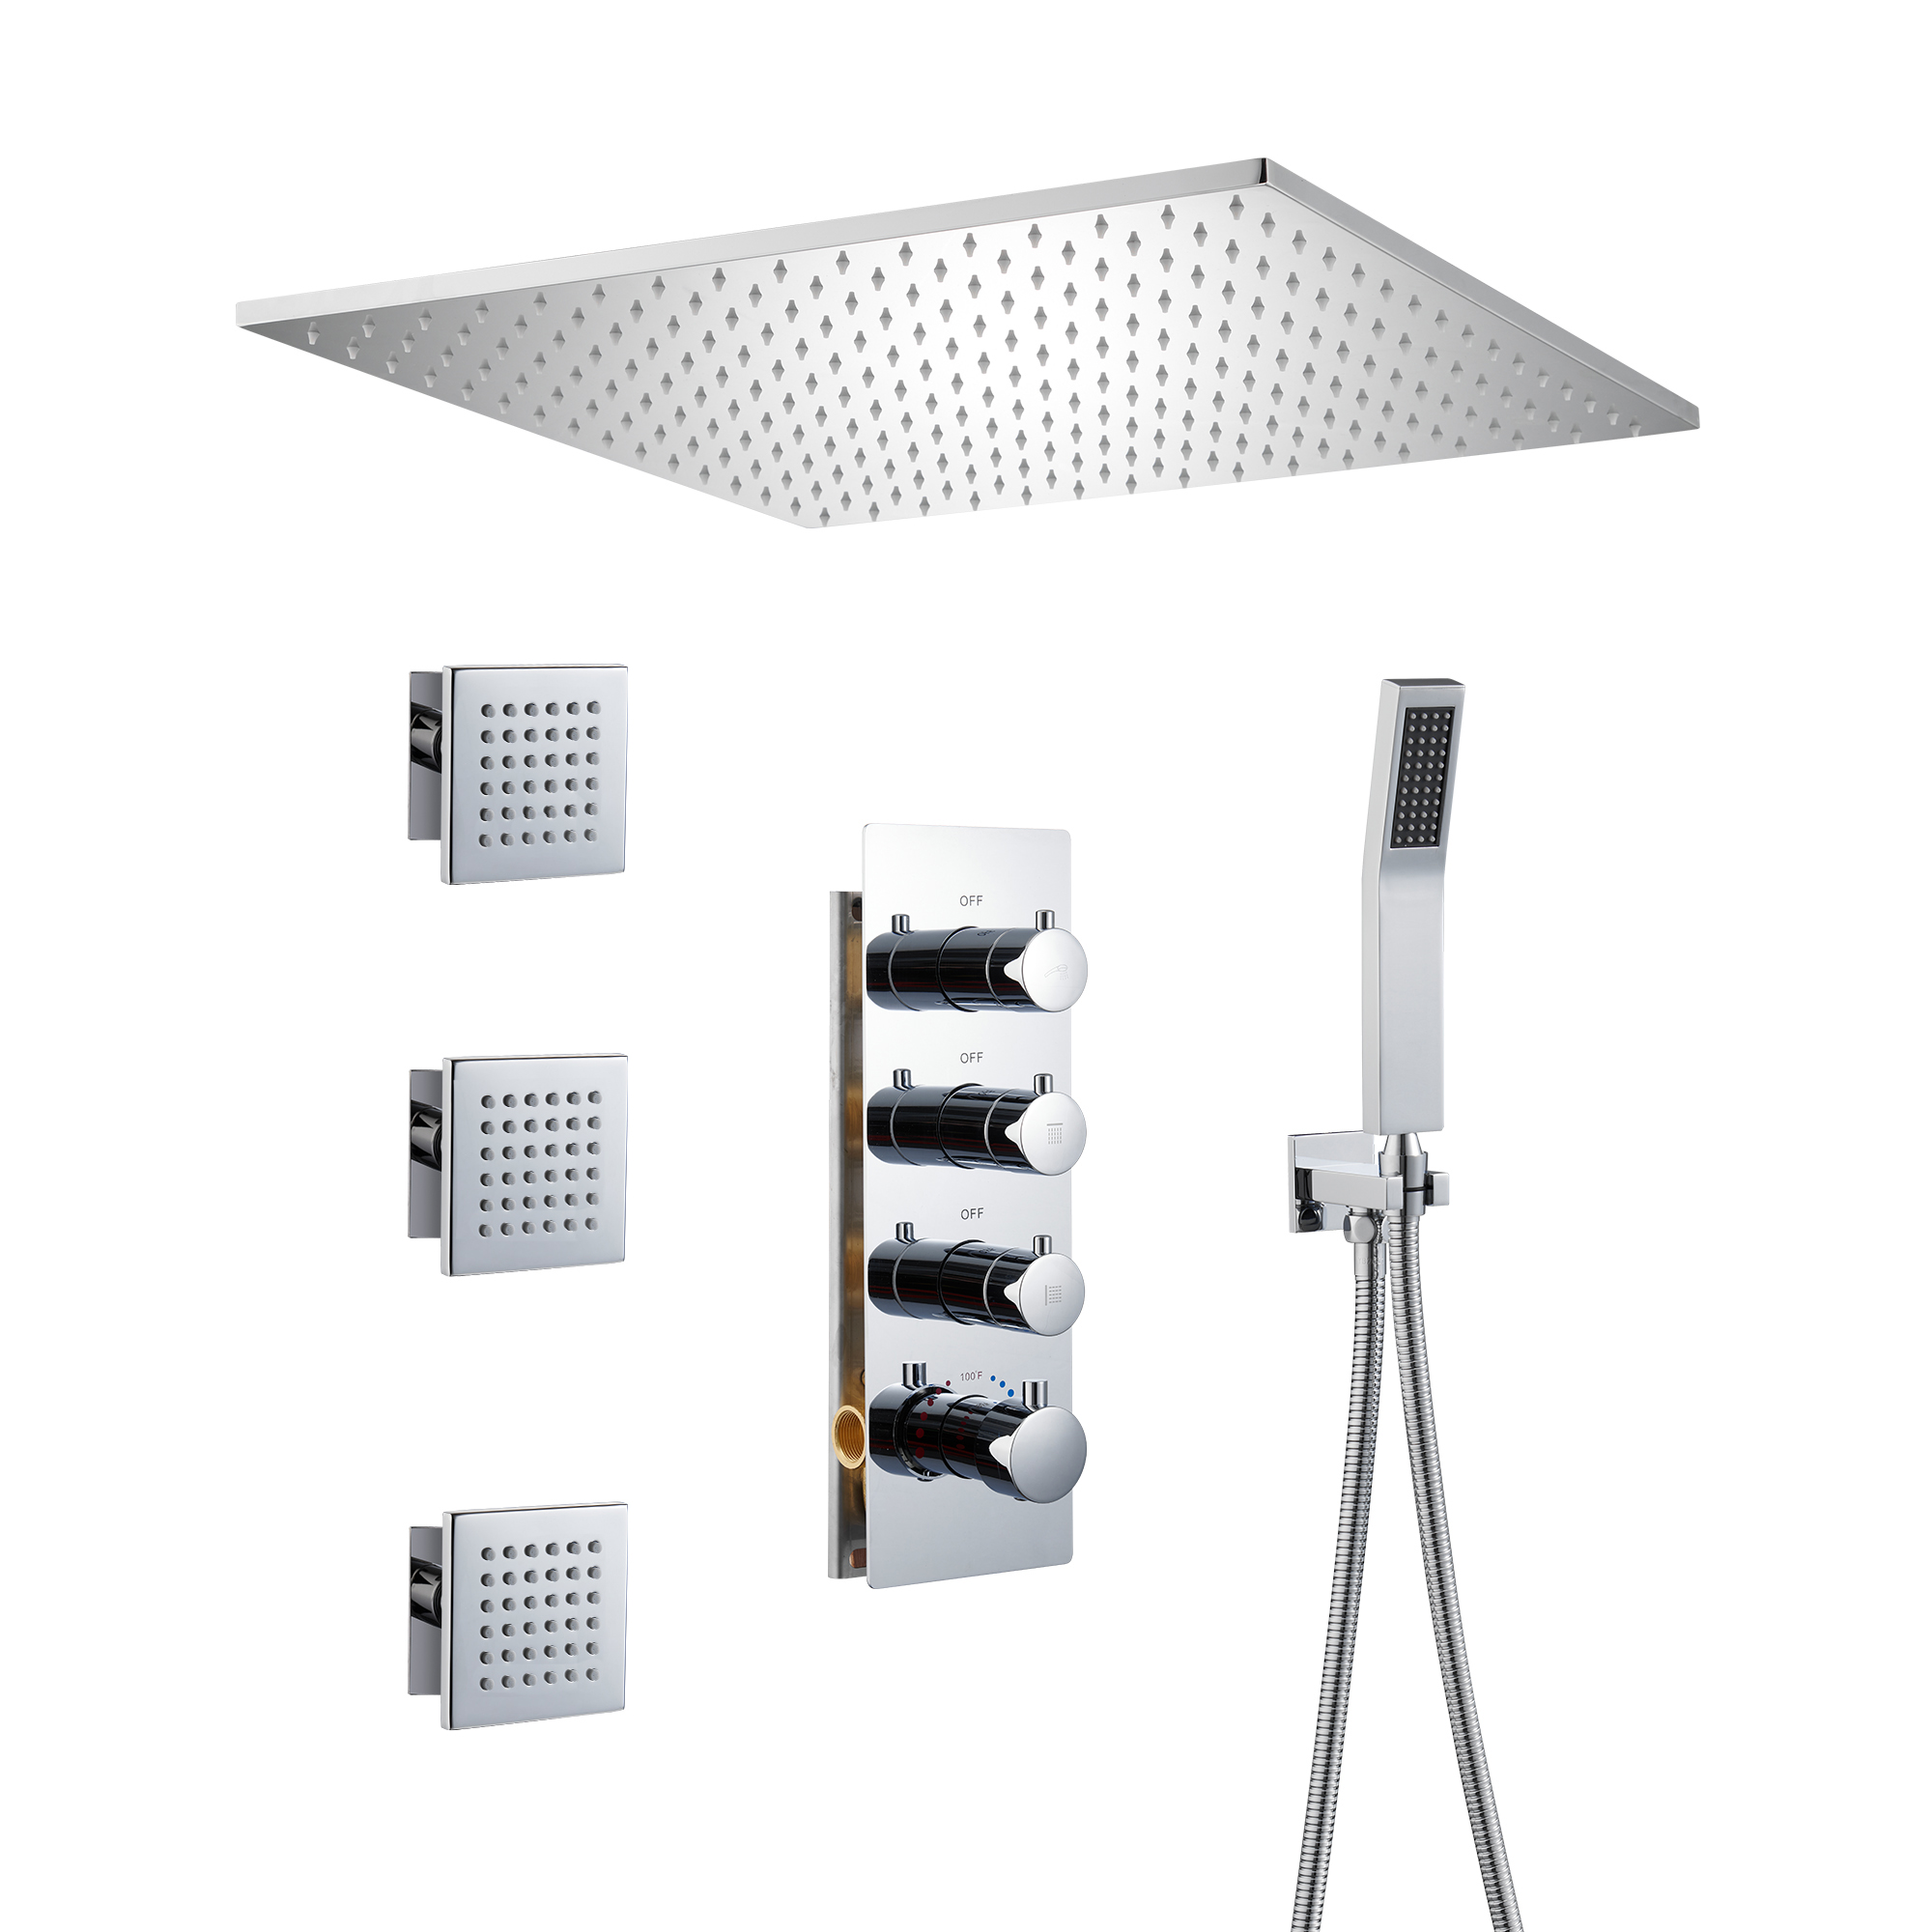 20 Inch Ceiling Mounted Rain Shower Head System Luxury 3-Spray Patterns Thermostatic Shower Faucets Sets Complete with 3-Function Shower Head and Solid Brass Handshower